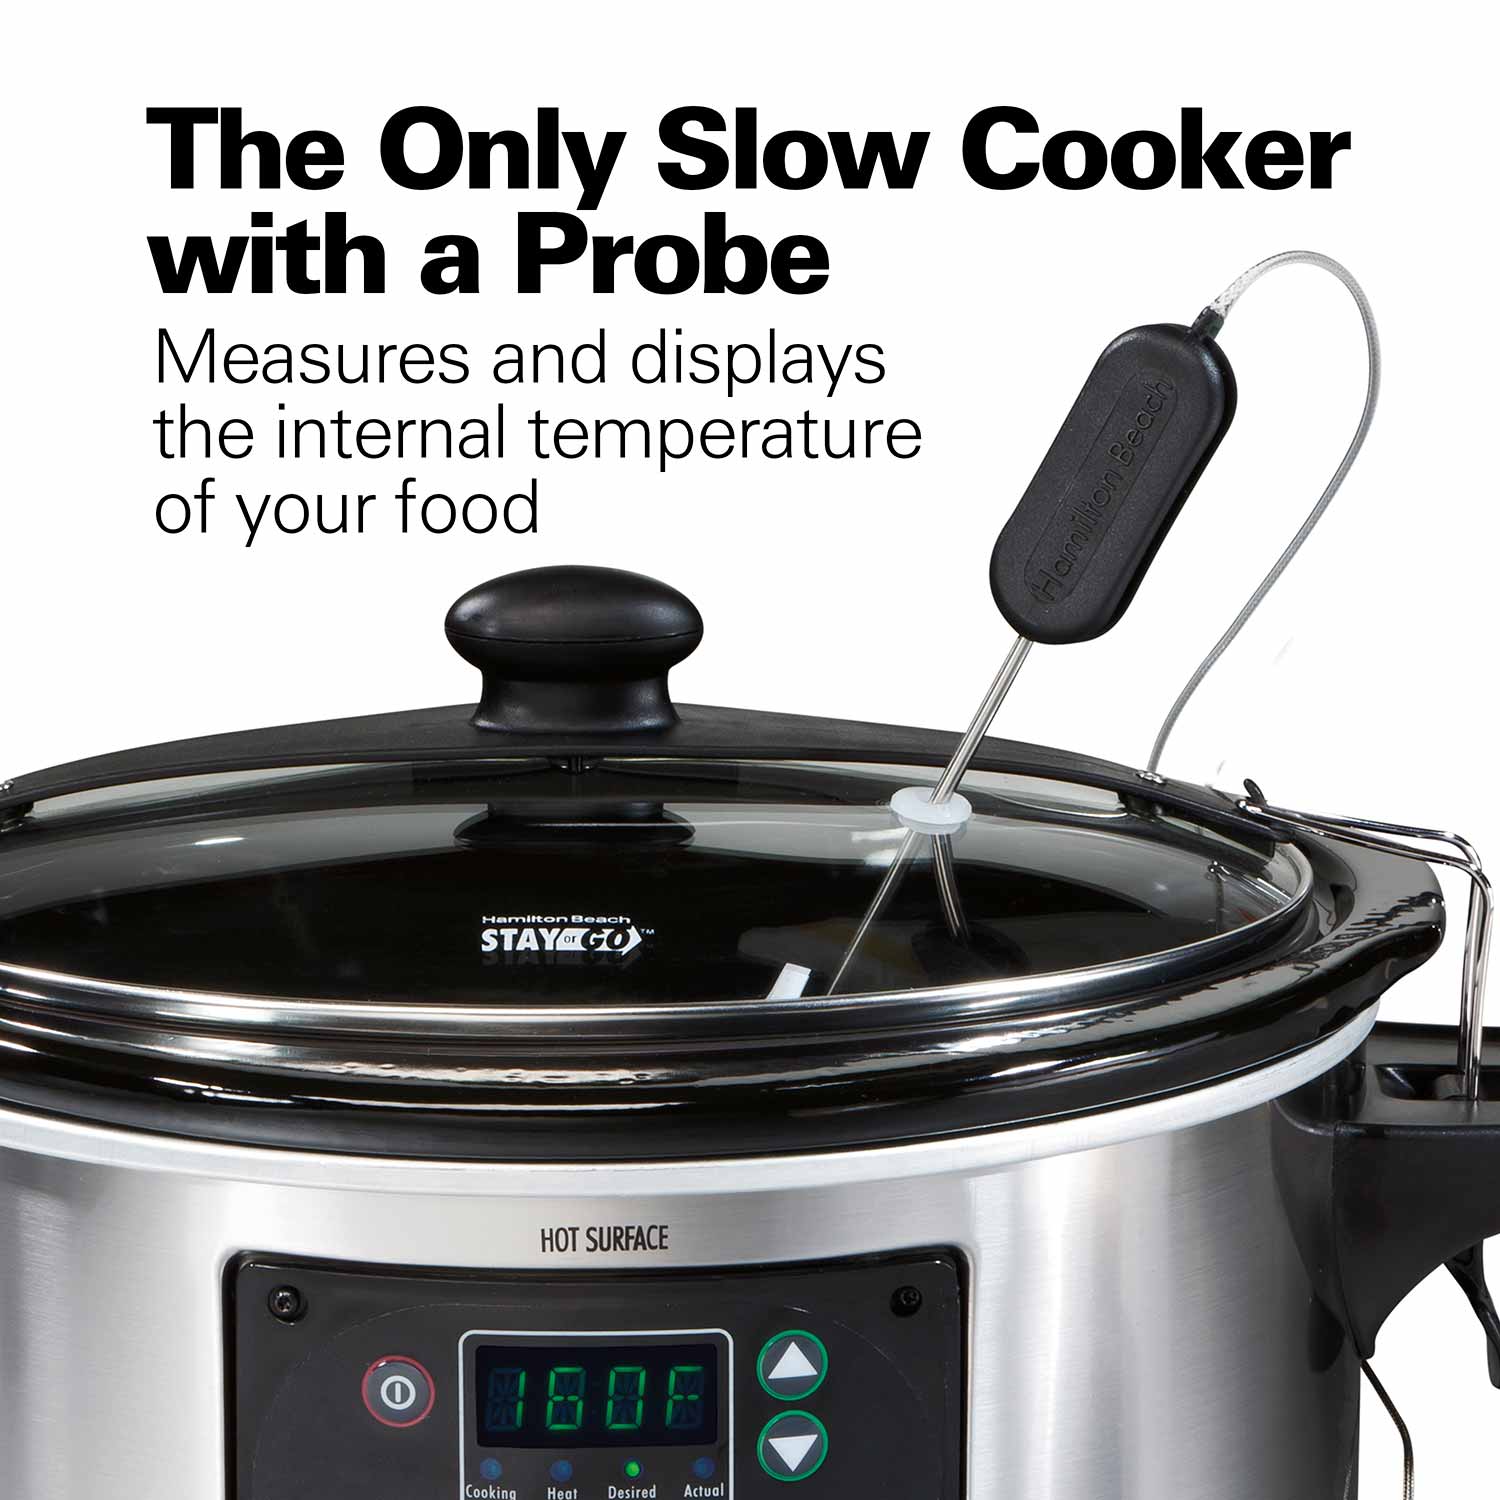 Hamilton Beach Set & Forget®6 Qt. Programmable Slow Cooker Stainelss Steel  - 33969A